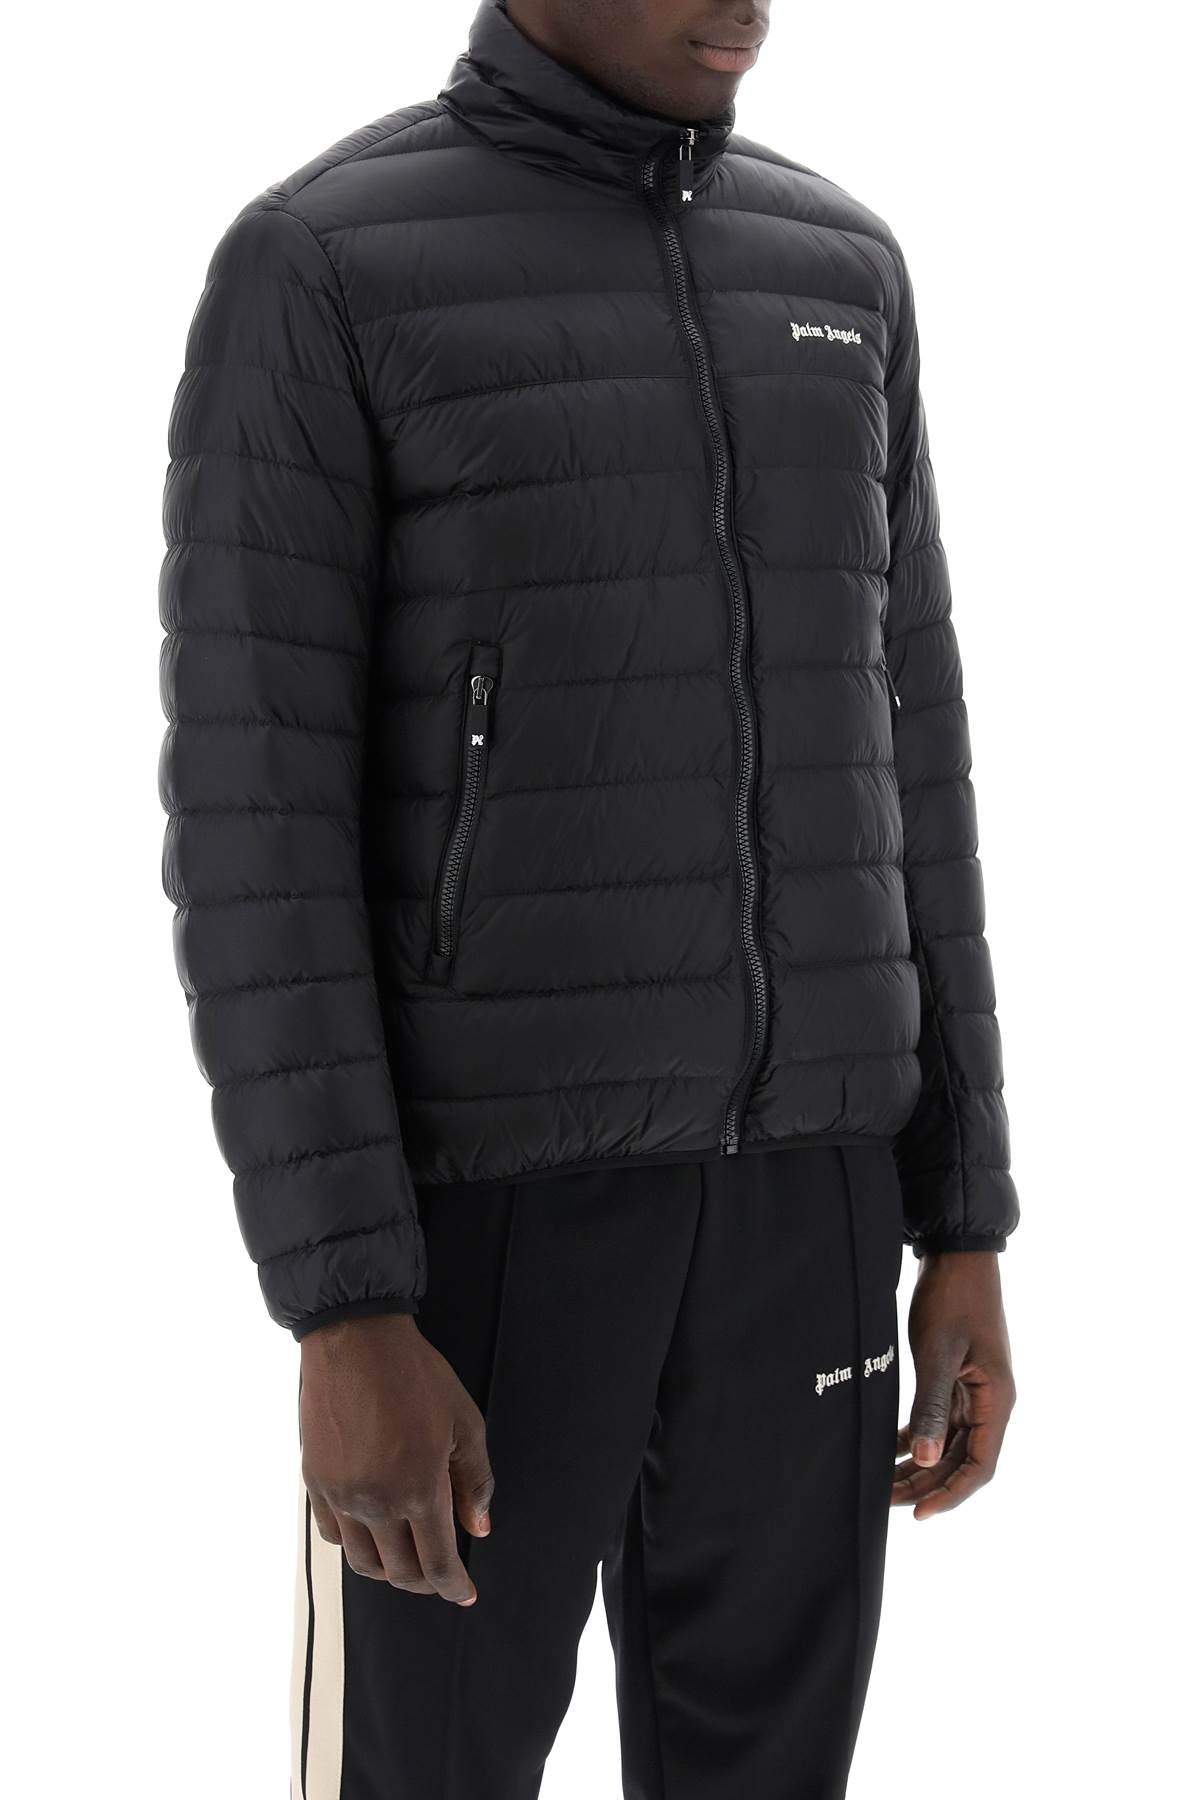 Palm Angels Lightweight Down Jacket With Embroidered Logo   Black